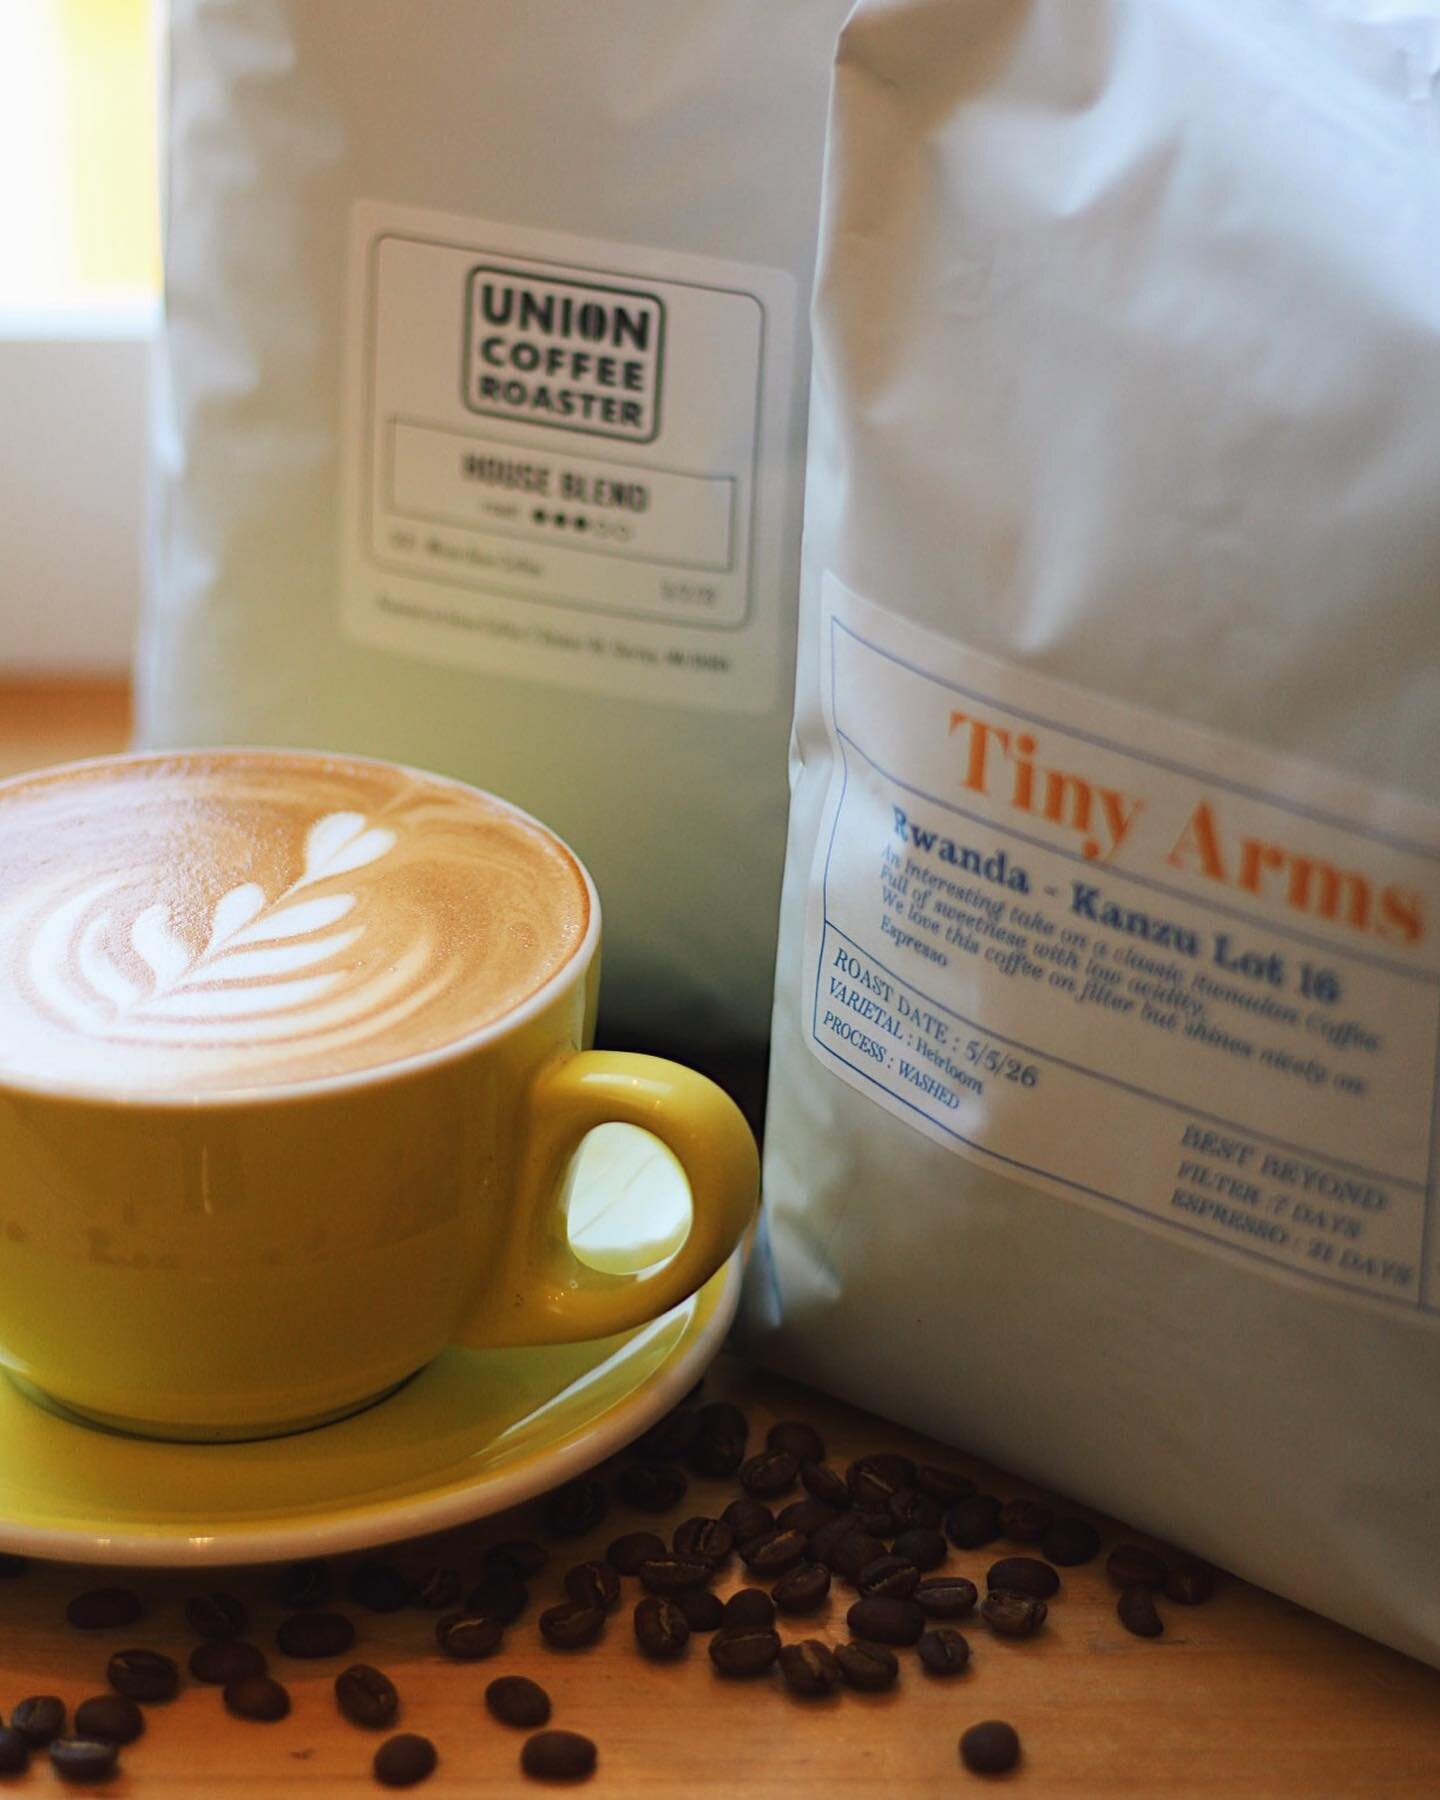 When in need&hellip; call a friend.  HUGE thank you to Tiny Arms &amp; Union Coffee! Come Check out their delicious coffees at both Seabird locations! 
 
This brings us back to our original mission of curating coffee for our community.  Can&rsquo;t w